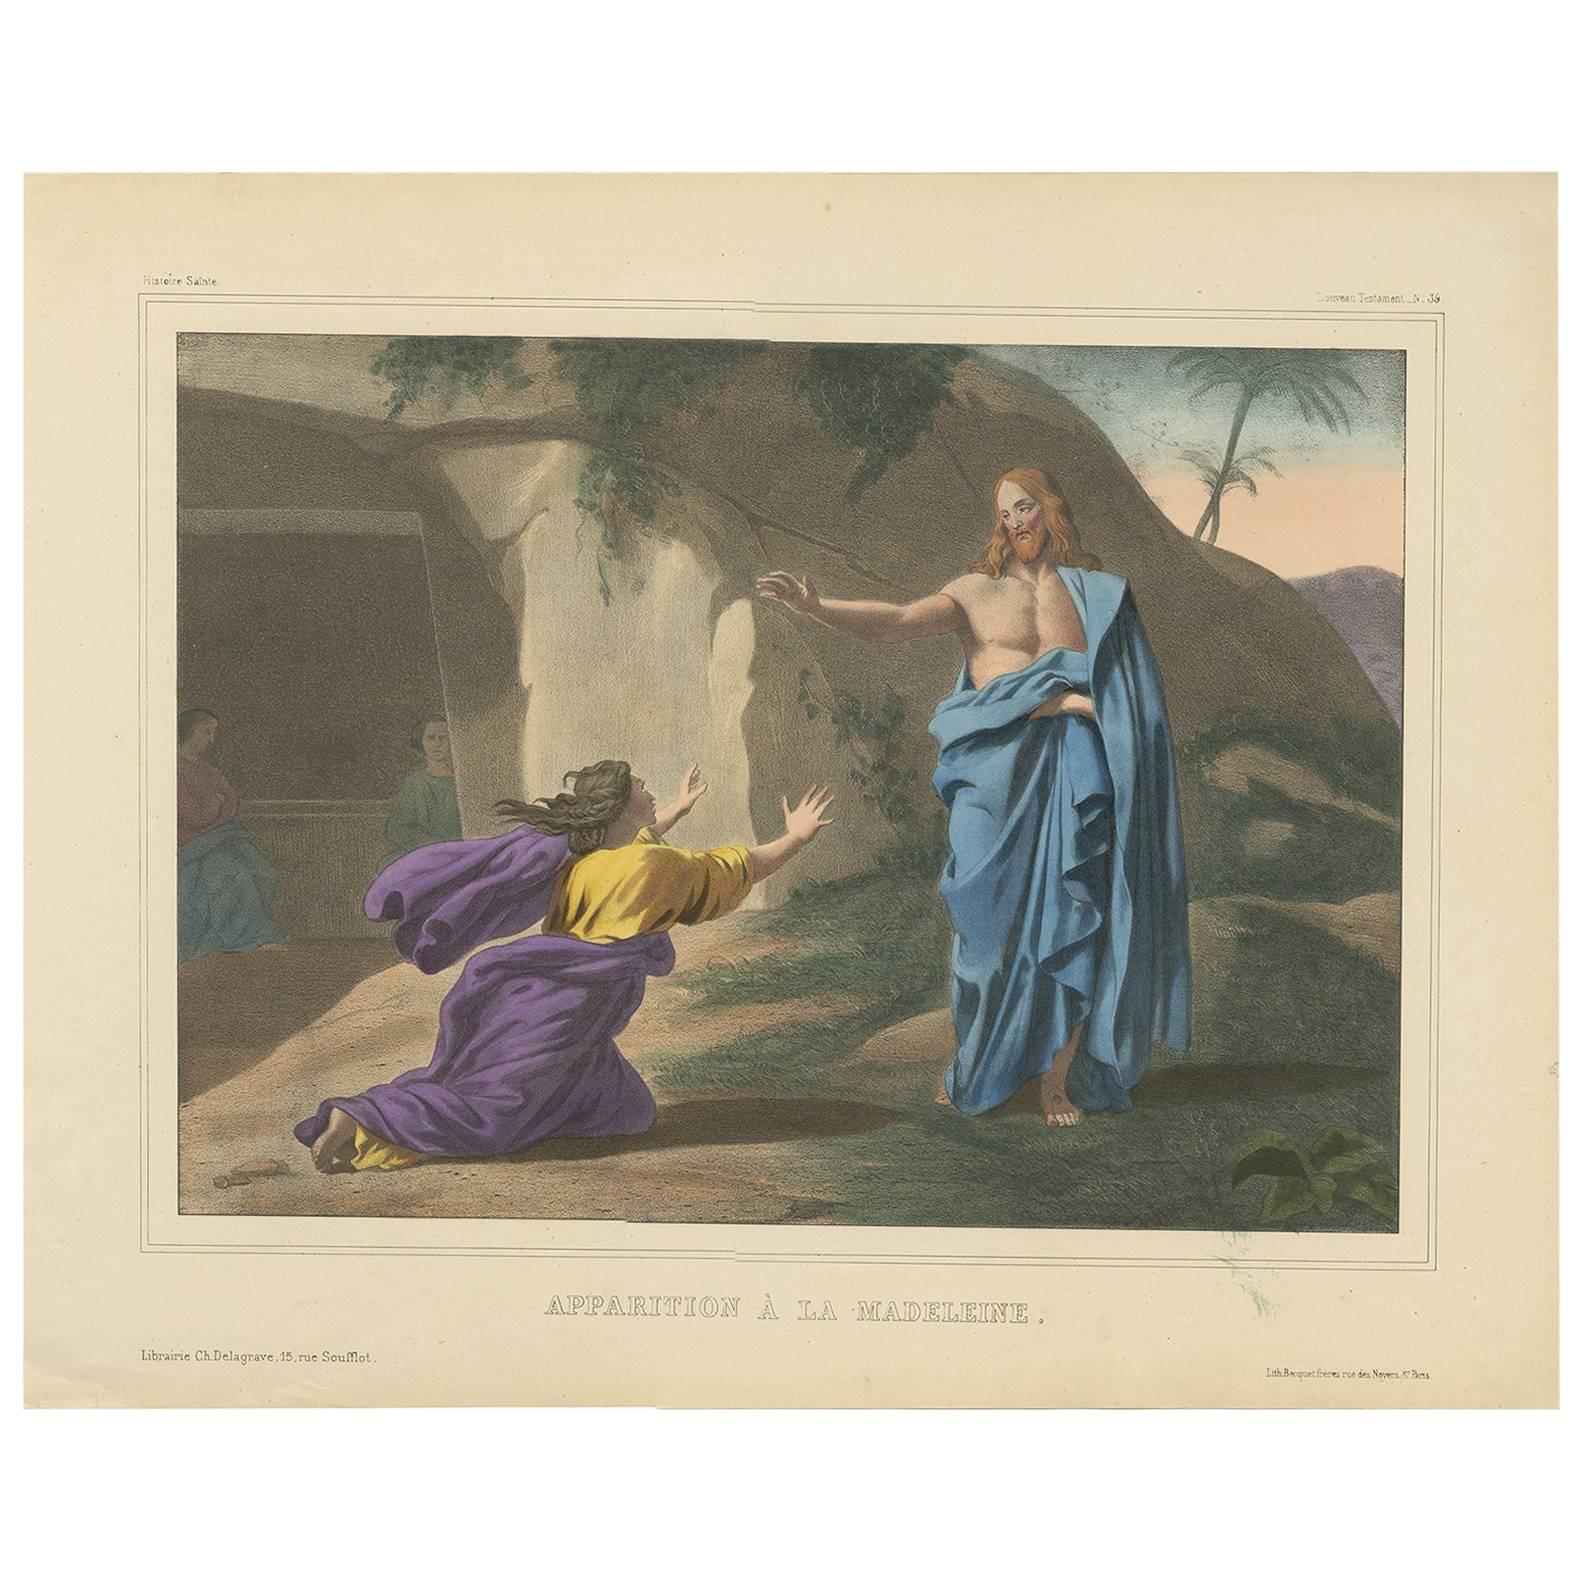 Antique Religious Print 'No. 39' the Appearance to Mary Magdalene, circa 1840 For Sale